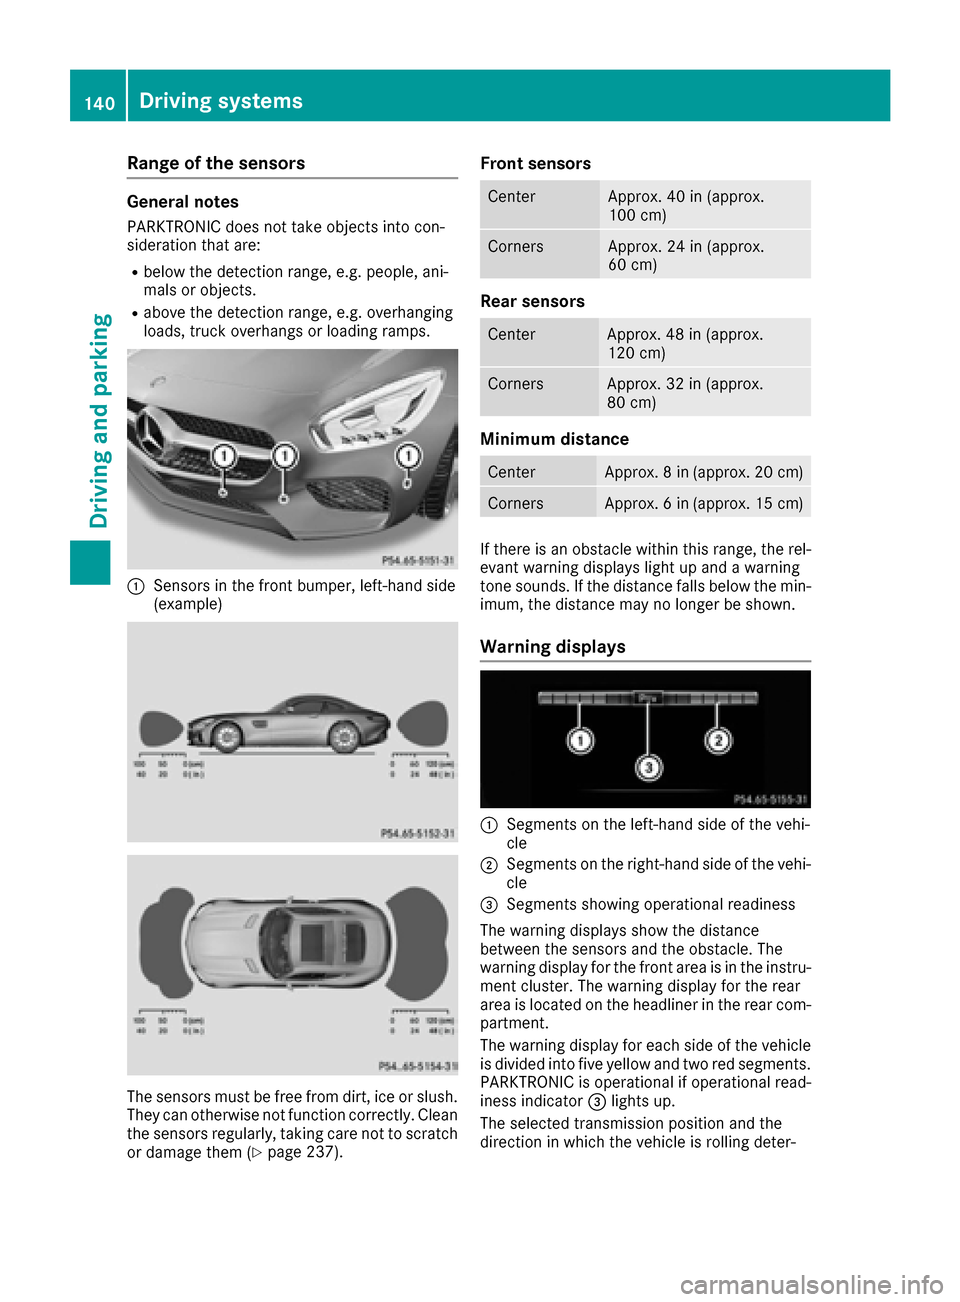 MERCEDES-BENZ AMG GT S 2017 C190 Owners Guide Range of the sensors
General notes
PARKTRONIC does not take objects into con-
sideration that are:
Rbelow the detection range, e.g. people, ani-
mals or objects.
Rabove the detection range, e.g. overh